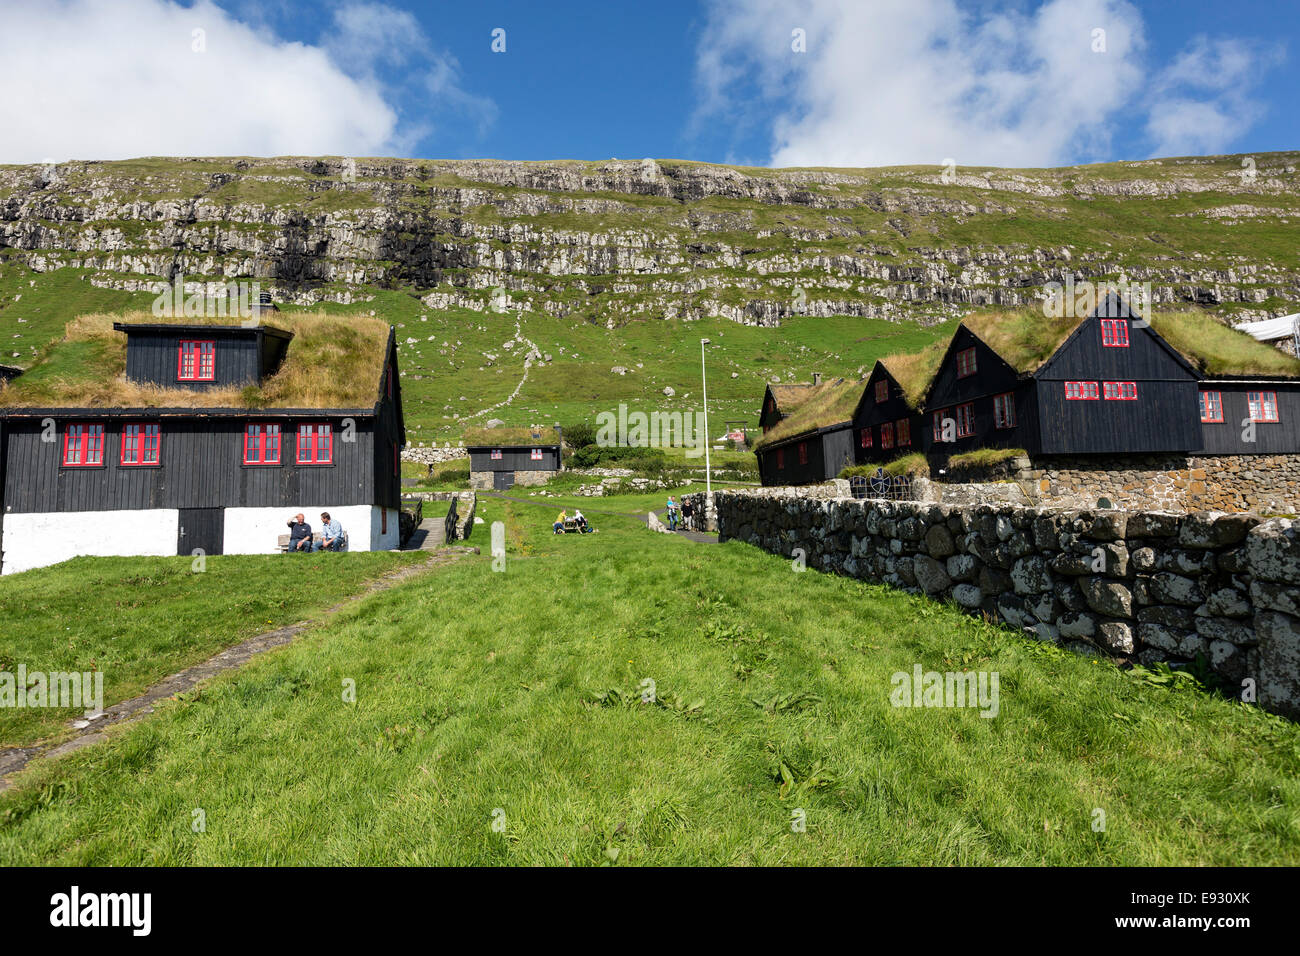 Colorful  wooden houses with roof turf covered  in Kirkjubøur, Streymoy island, Faroe Islands, Stock Photo